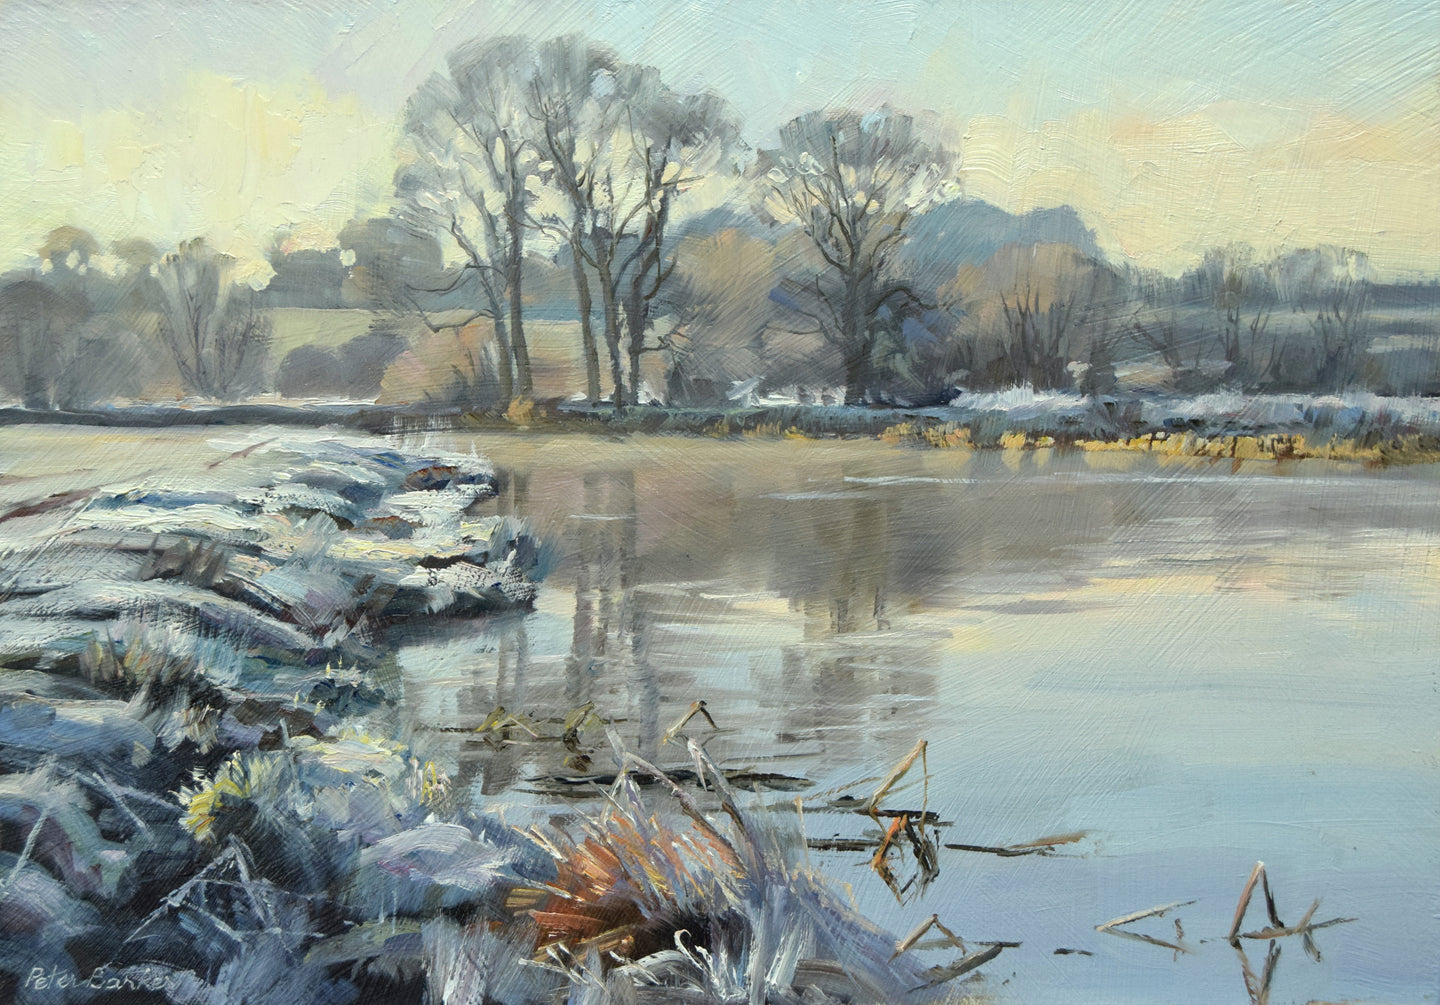 7 x 10 inch oil painting of a sharp frost by the River Nene near Water Newton, with large trees on the far bank, reflected in the river, painted inn a loose, impressionistic style.